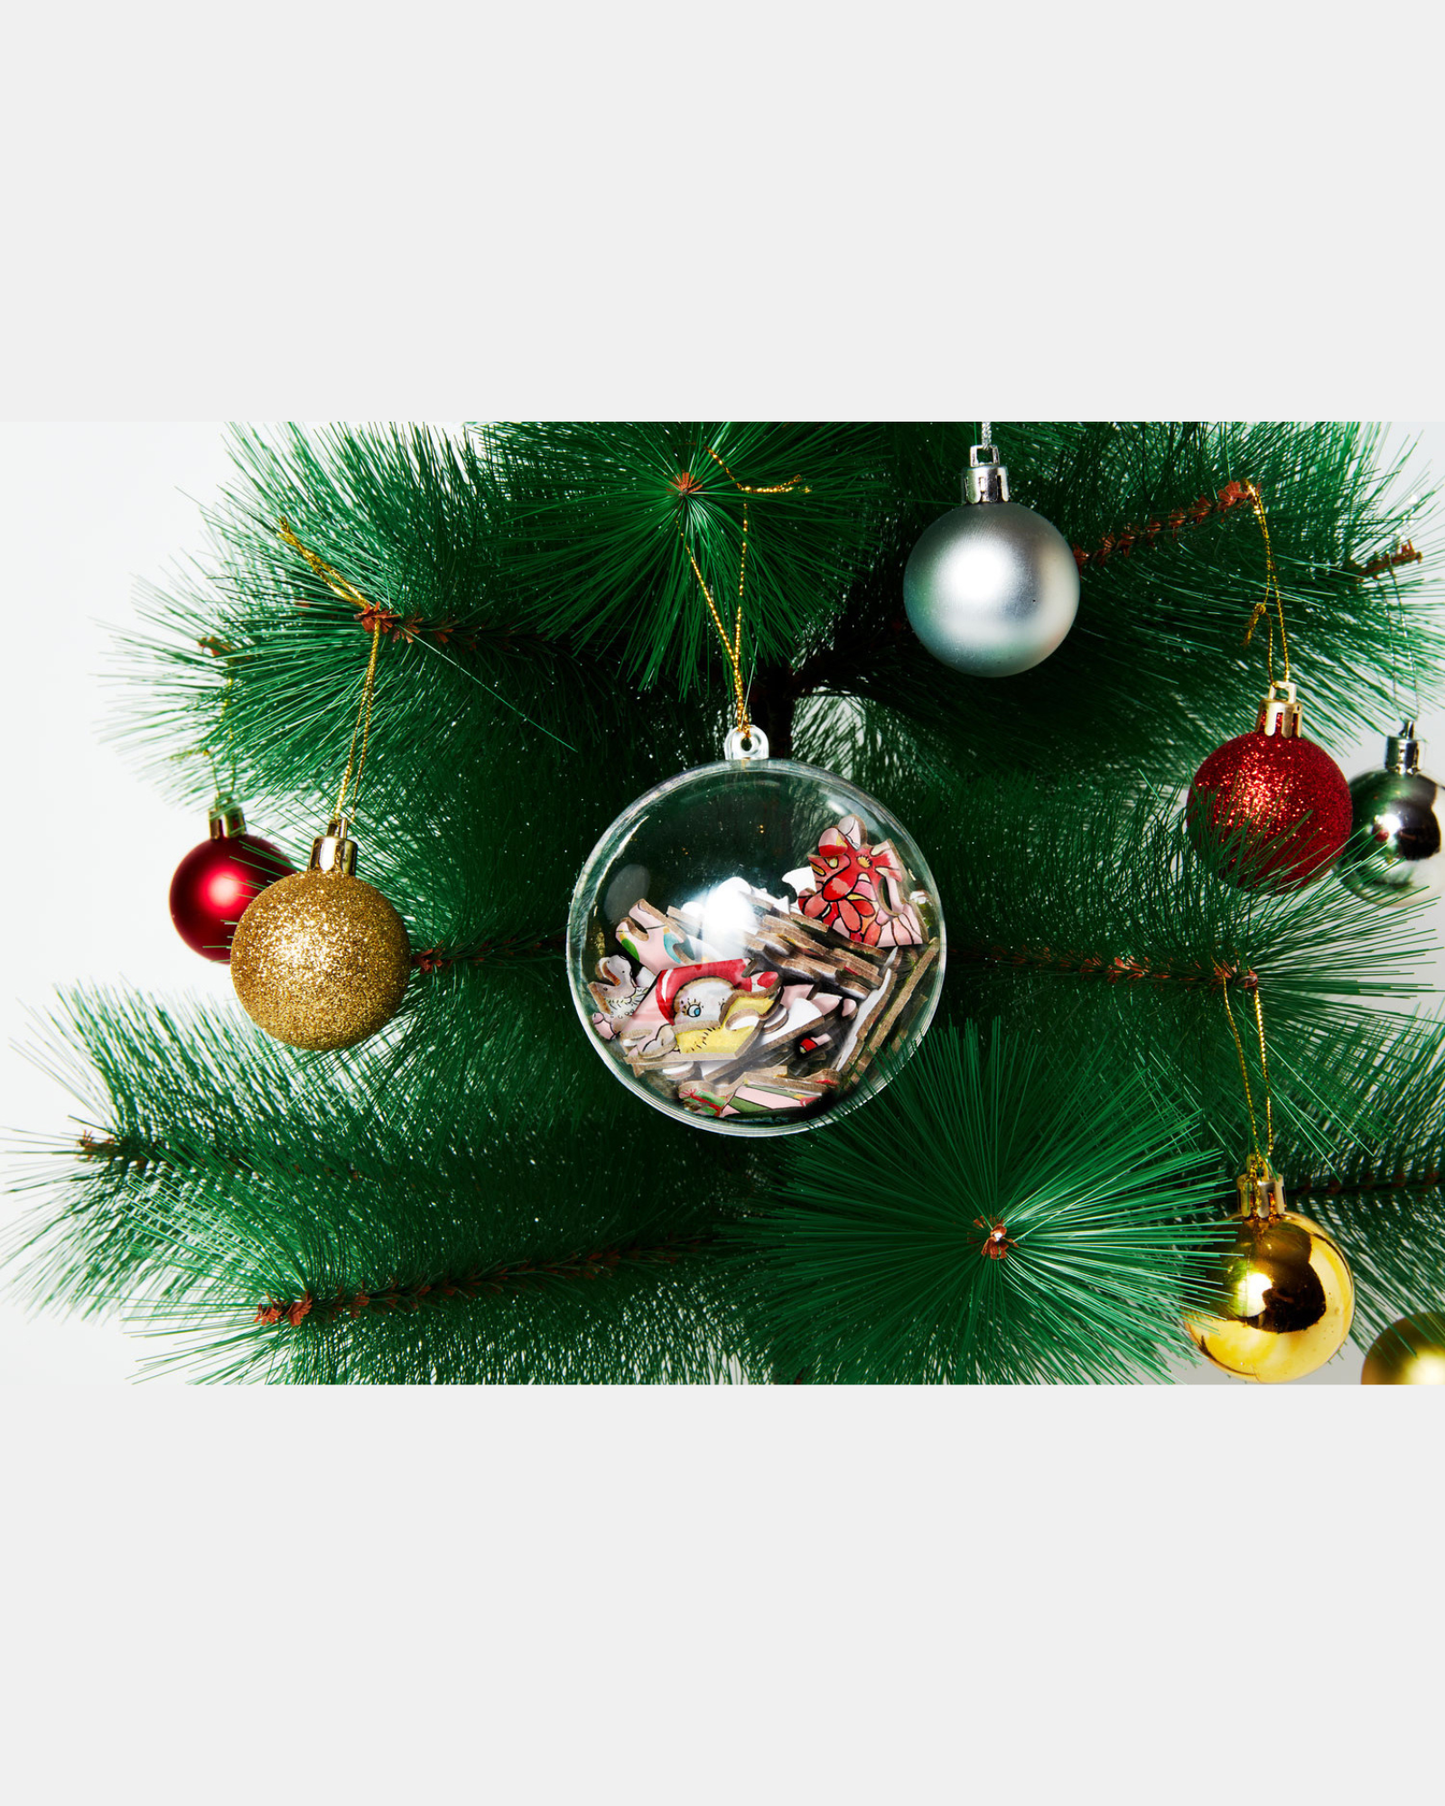 42 Piece May Gibbs Puzzle in Christmas Tree Ornament